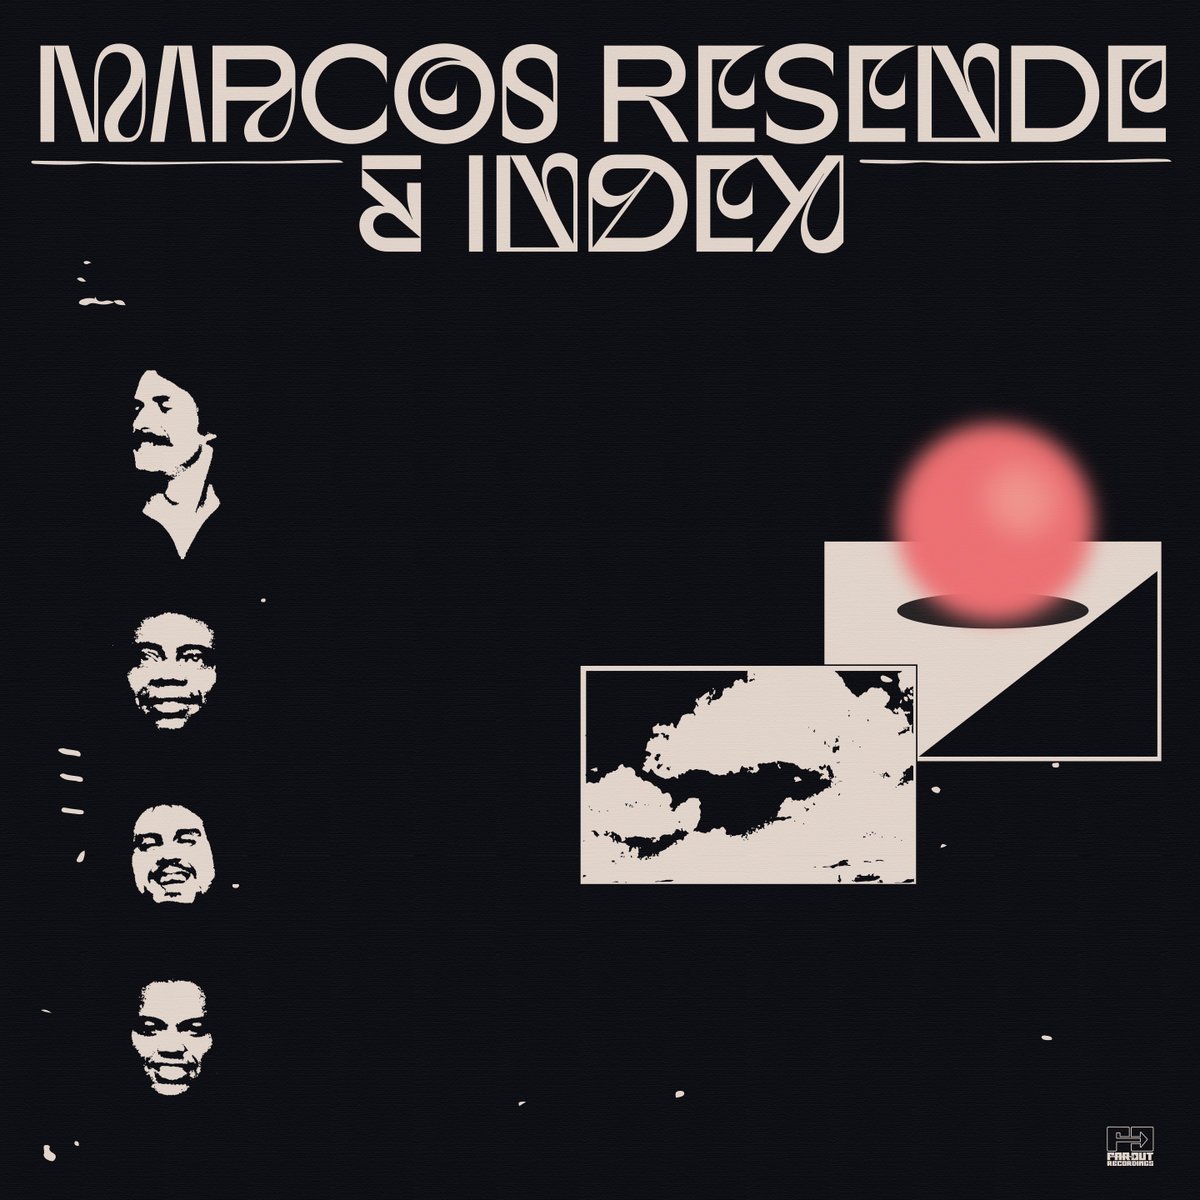 Marcos Resende & Index – Marcos Resende & Index (Far Out Recordings - 2021)